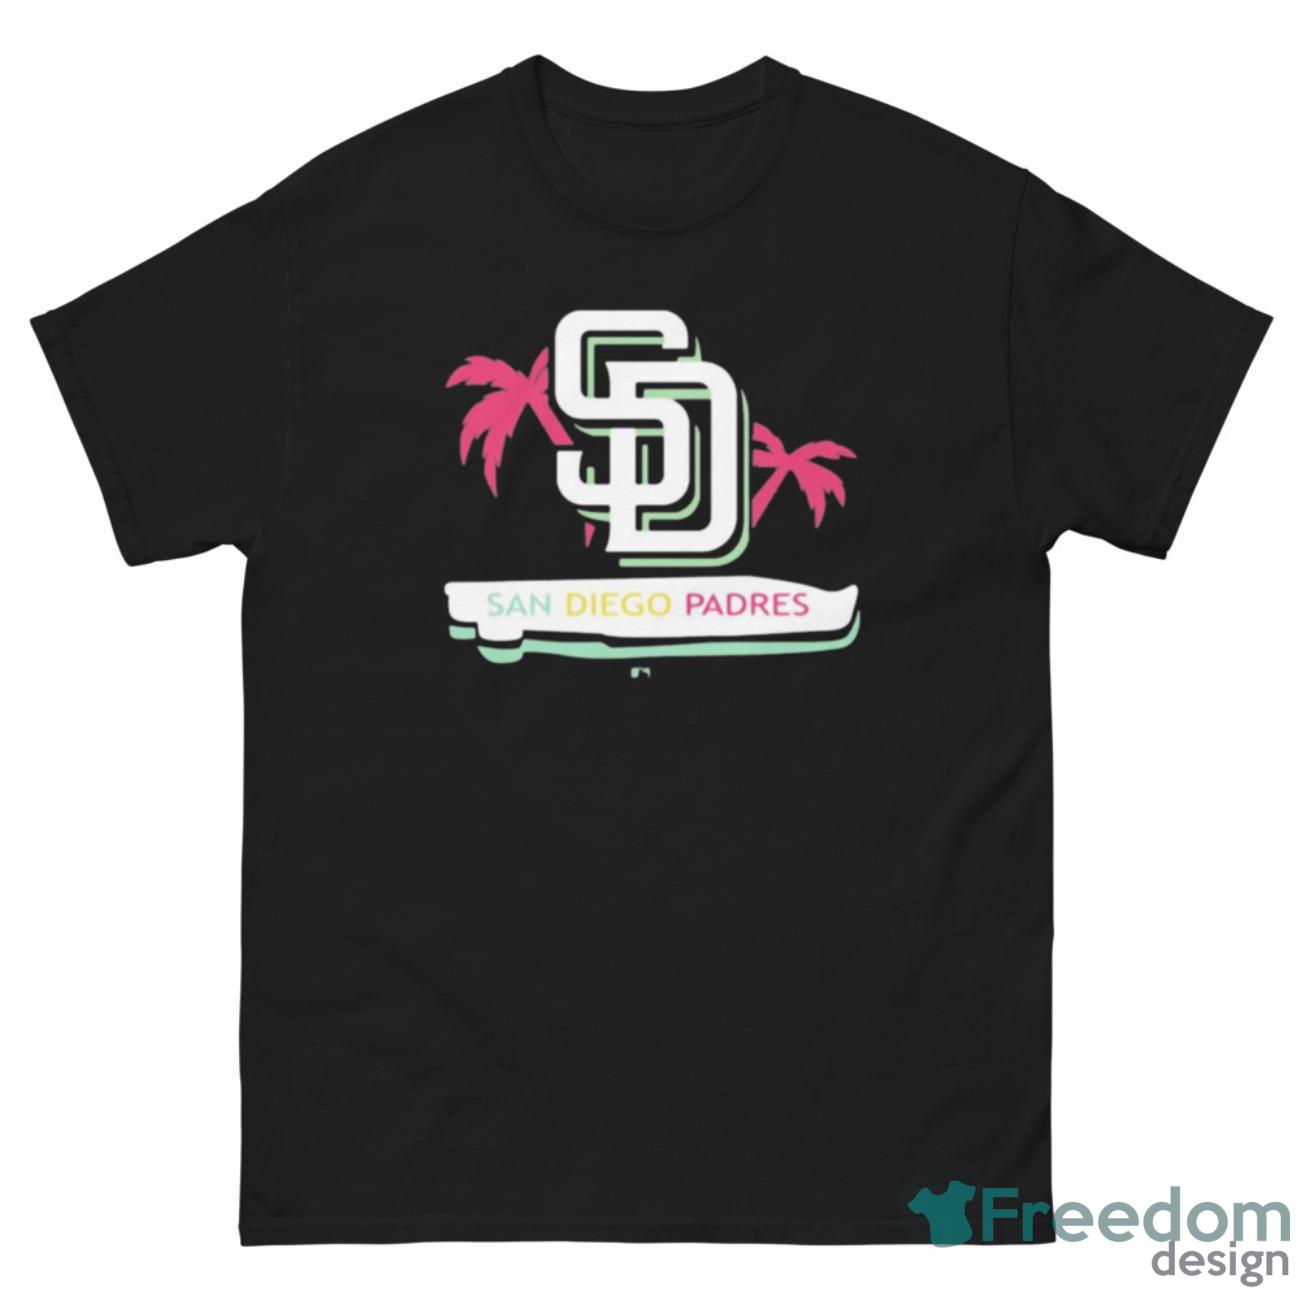 Design San Diego Padres 2022 City Connect T-Shirt, hoodie, sweater